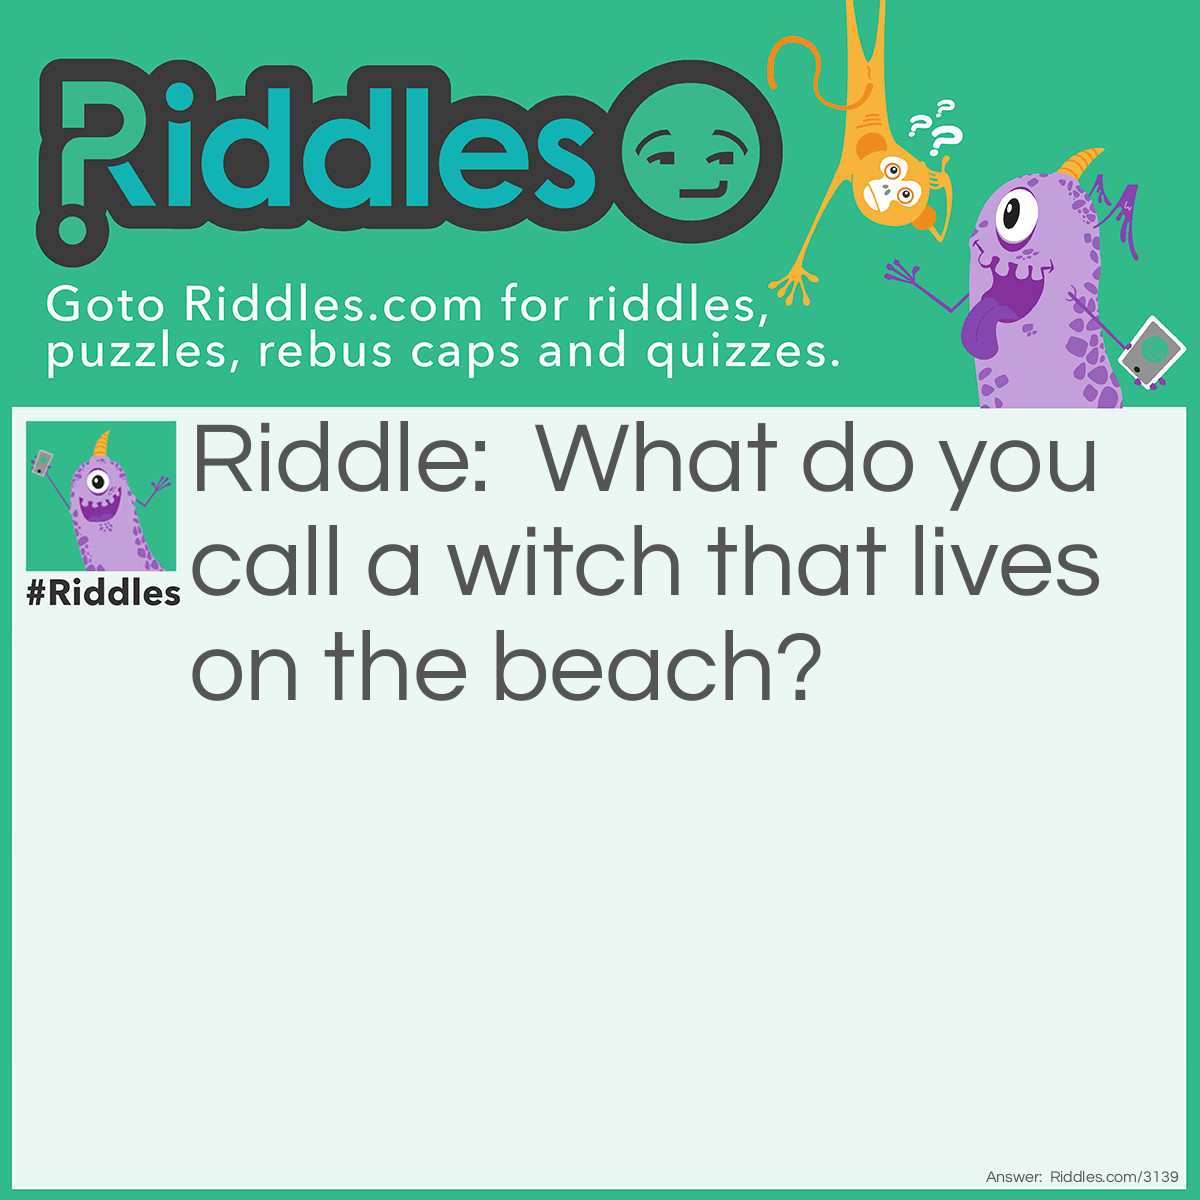 Riddle: What do you call a witch that lives on the beach? Answer: Sandwitch.